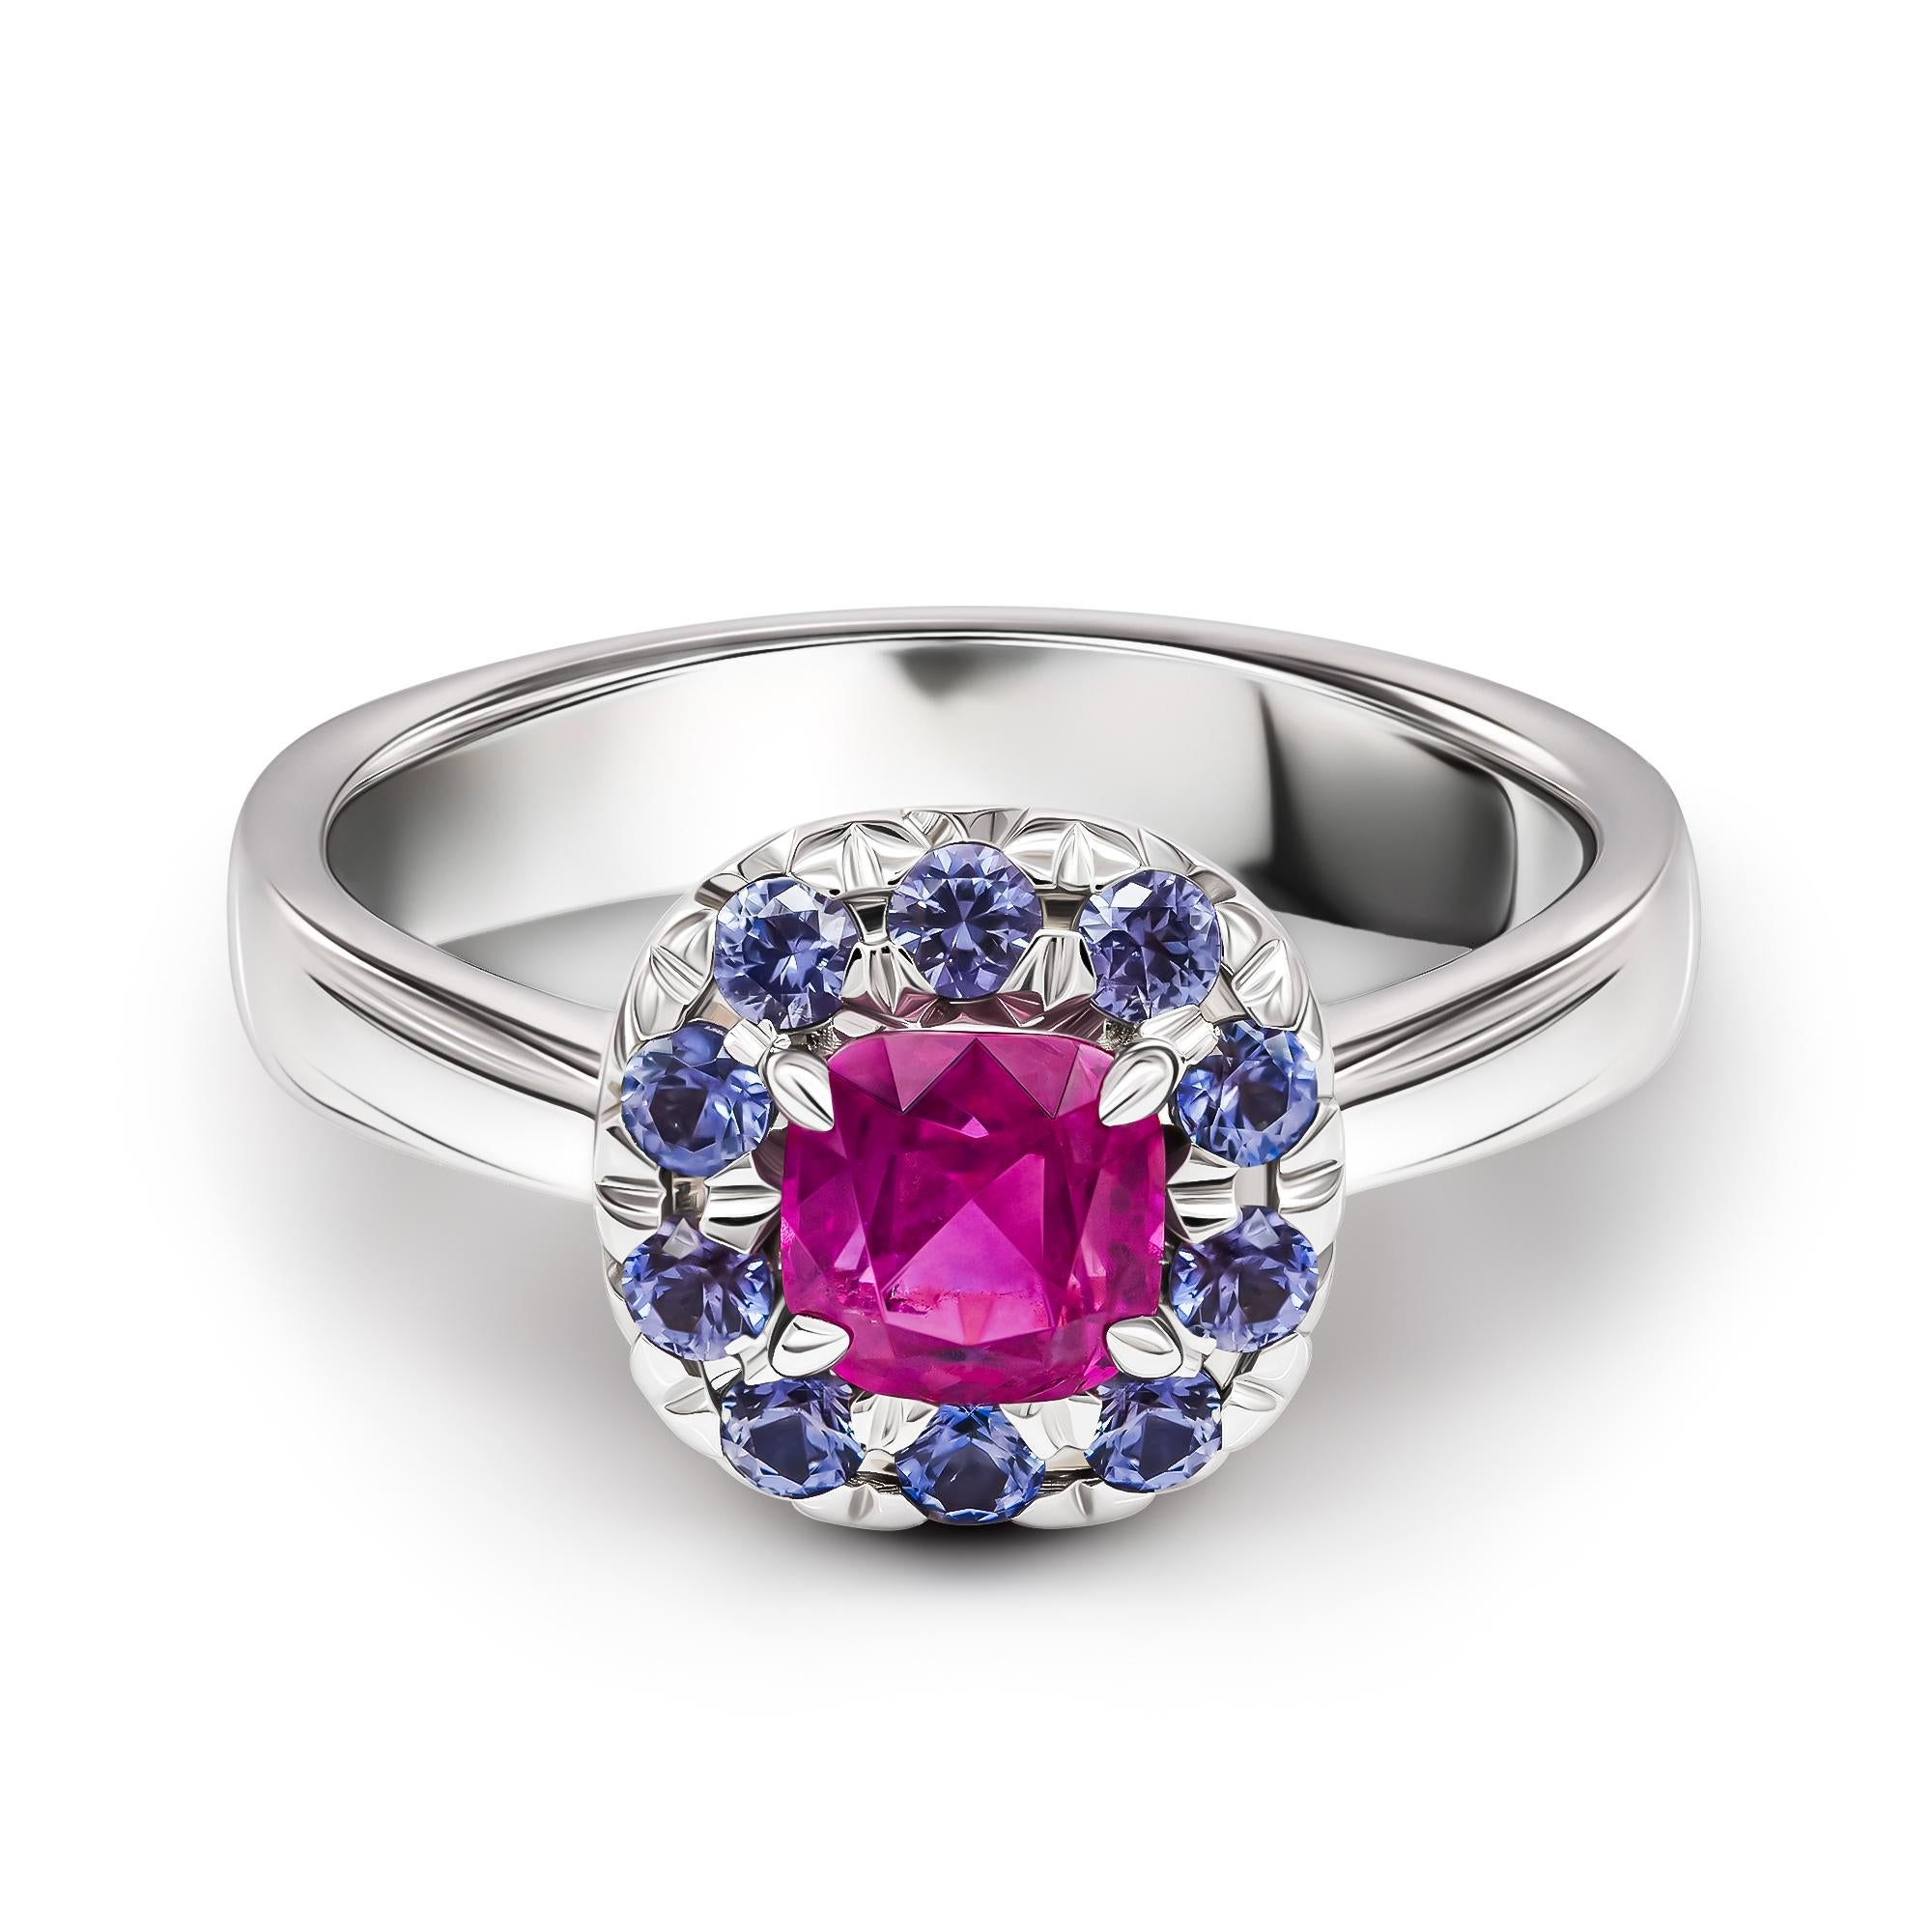 •	18k white gold. 
•	Unheated Ruby in cushion cut – total carat weight 0.85. 
•	Unheated sapphire in round cut   – total carat weight 0.48.  
•	Product weight – 6.08 grams
•	Ring size – 7’.
